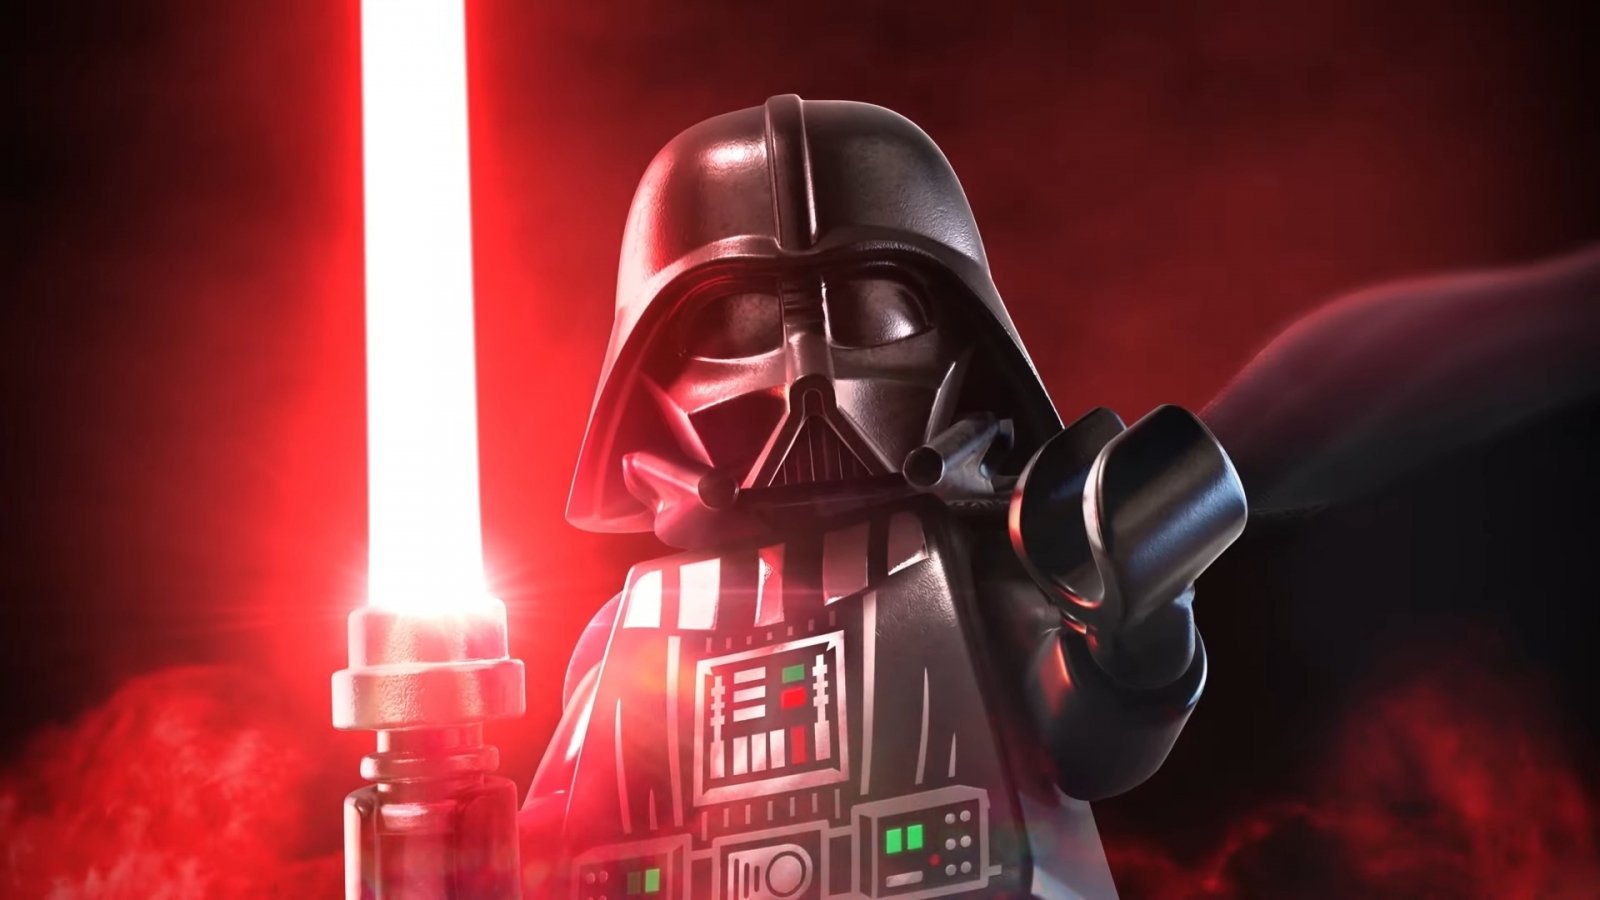 LEGO Star Wars: The Skywalker Saga out now, launch trailer released